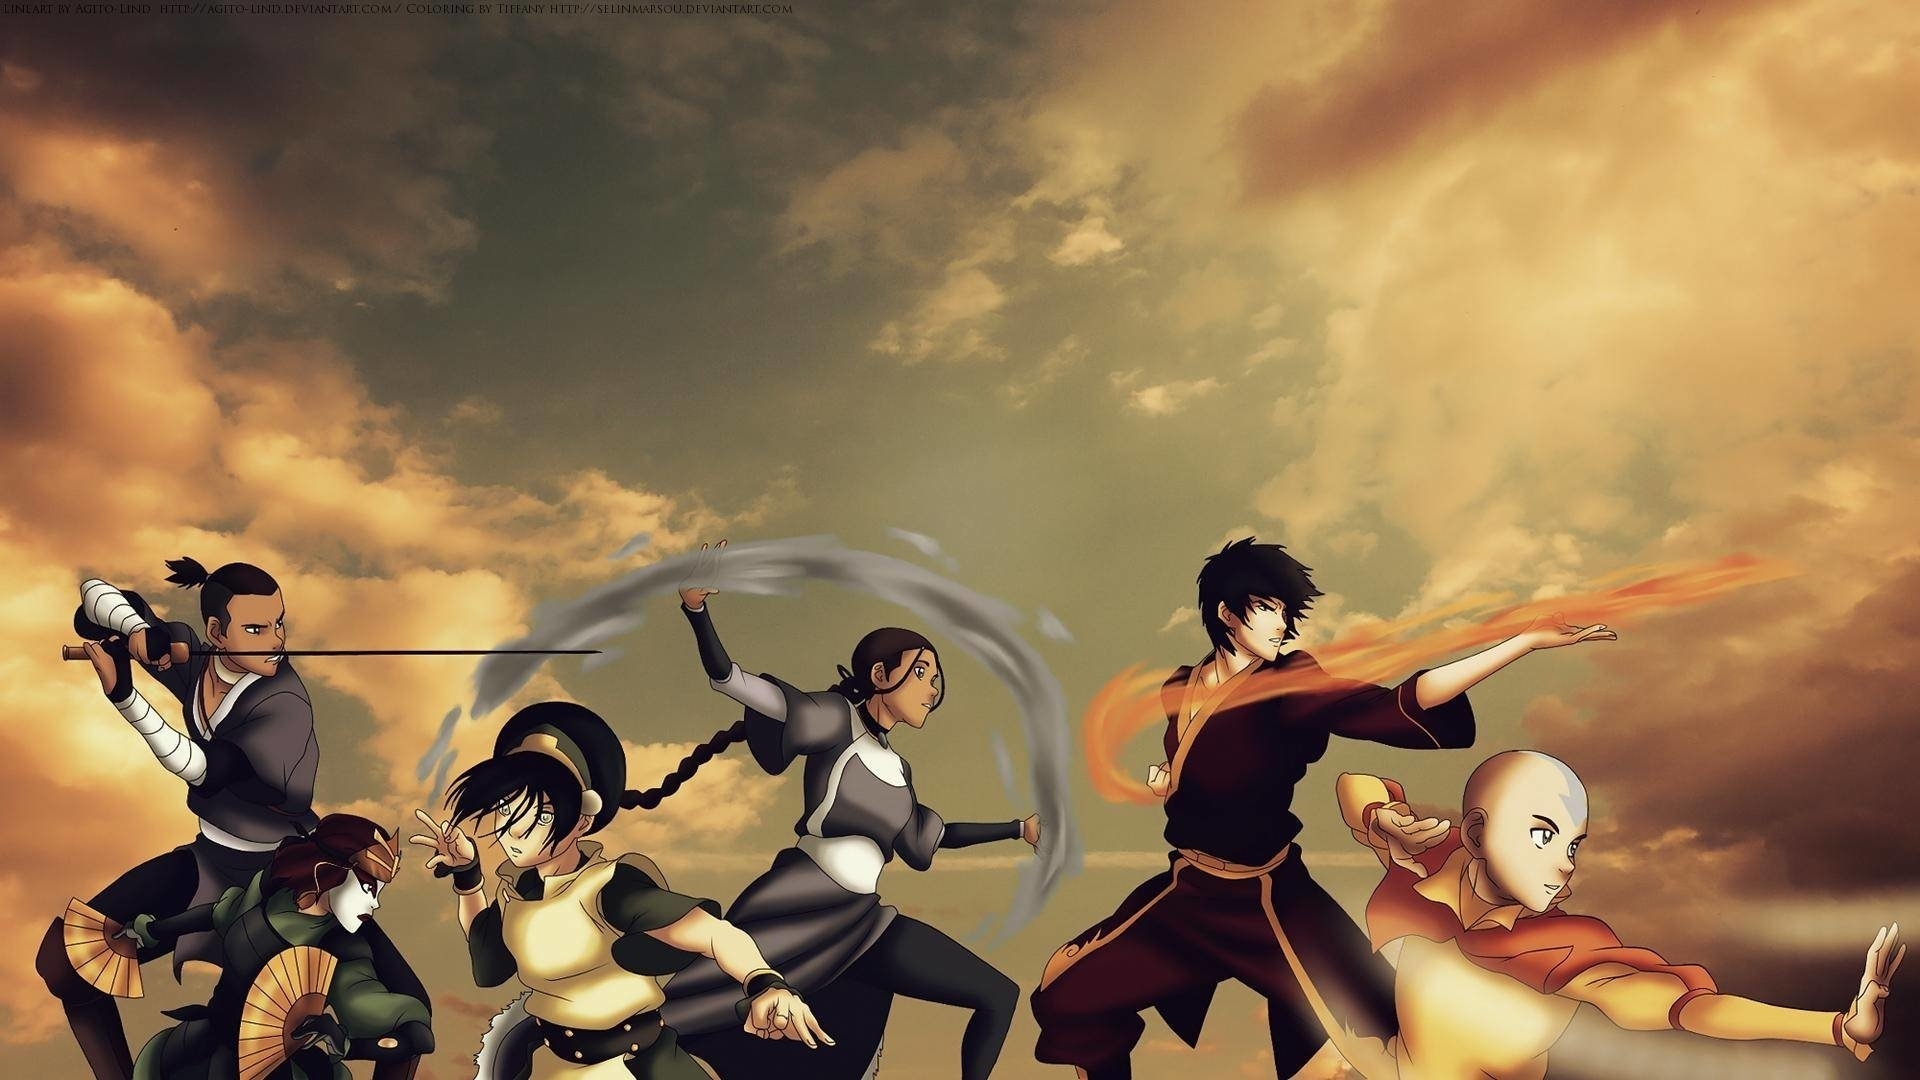 116 avatar: the last airbender hd wallpapers | background images